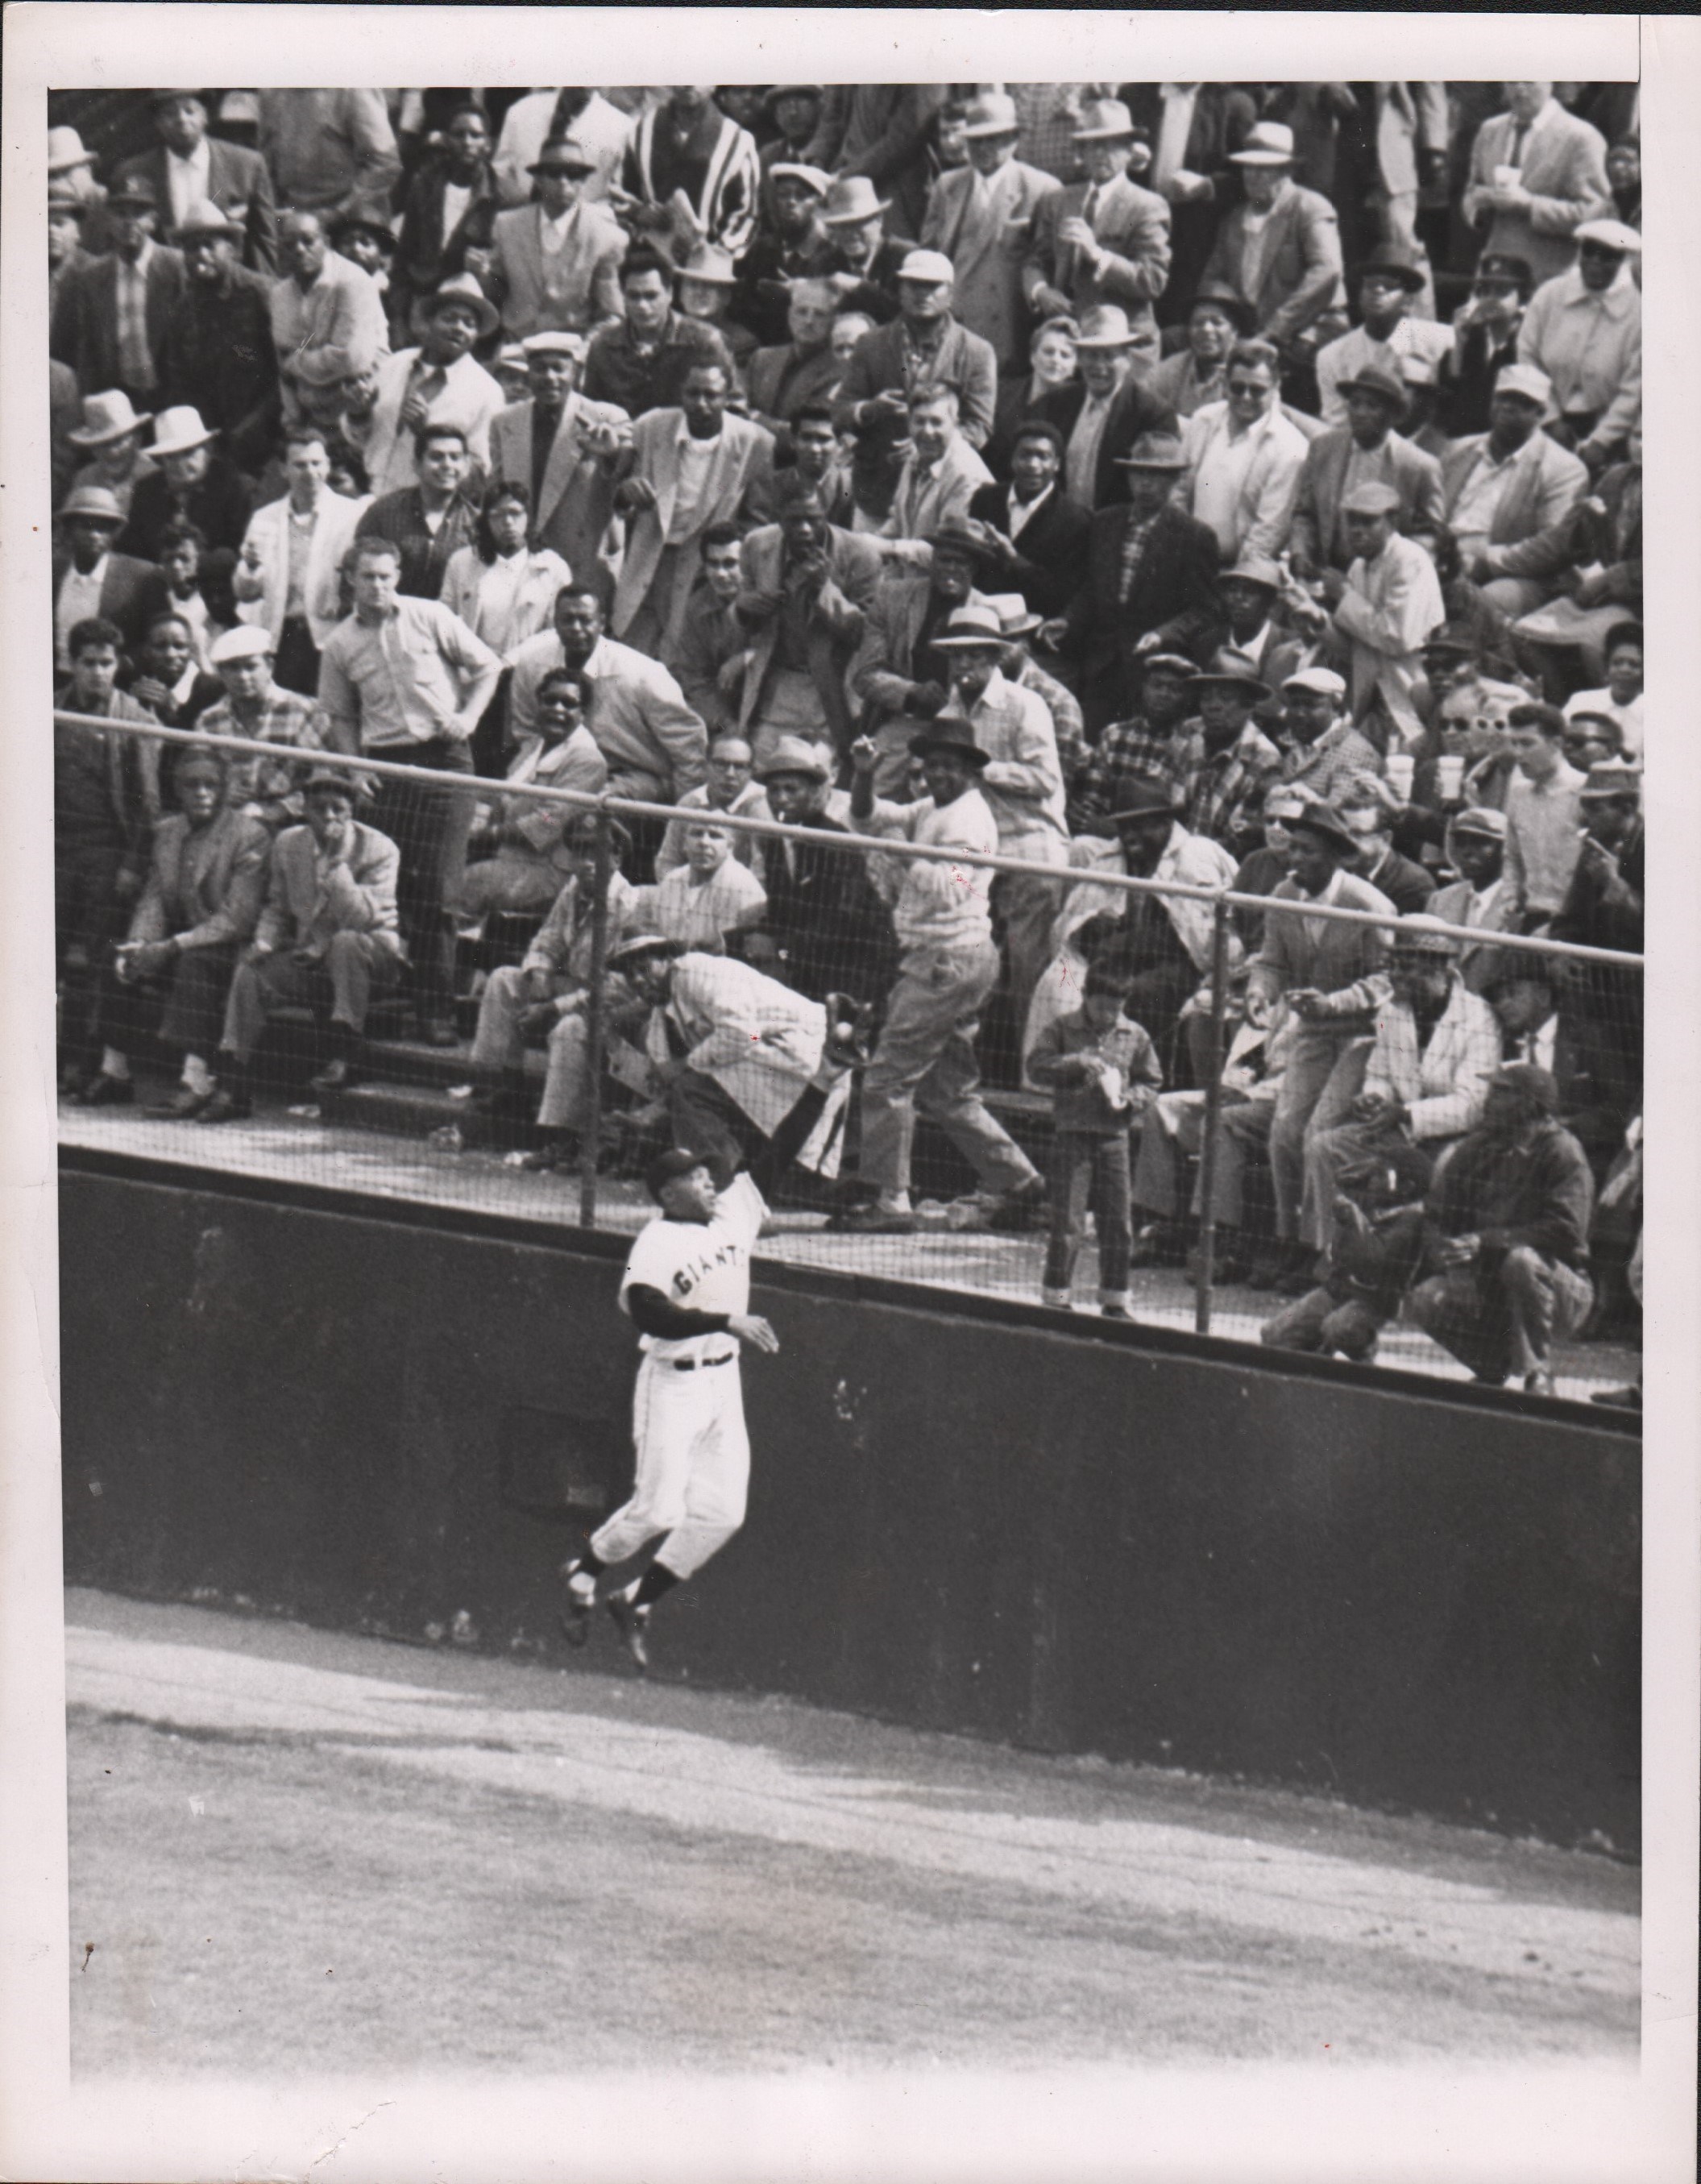 - 1950s Willie Mays "Not The Catch" Type I Photo